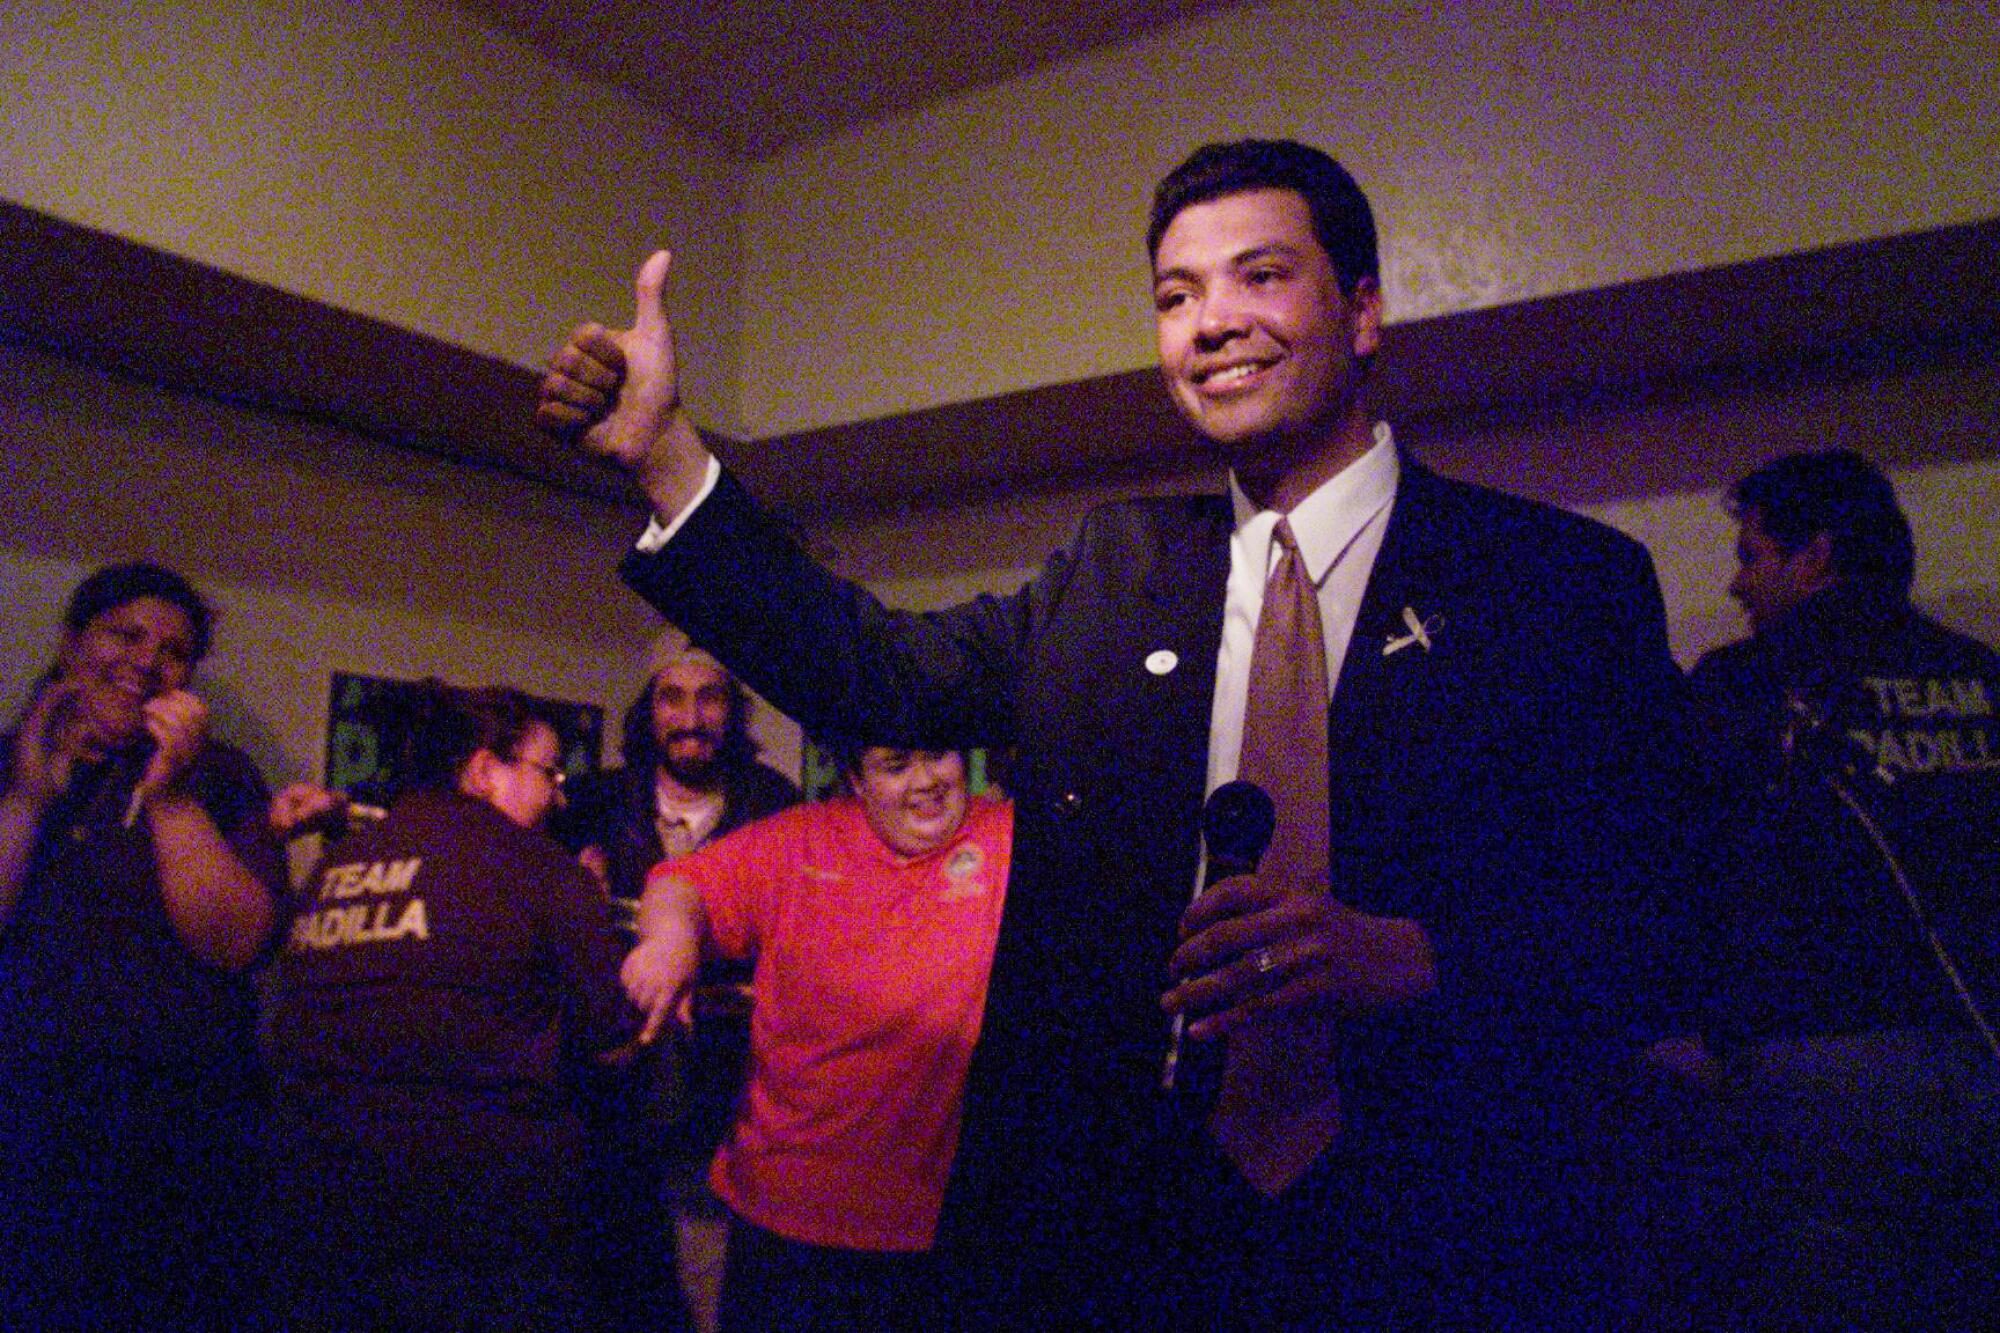 Then-Los Angeles City Council candidate Alex Padilla addressing supporters in Sylmar in 1999.